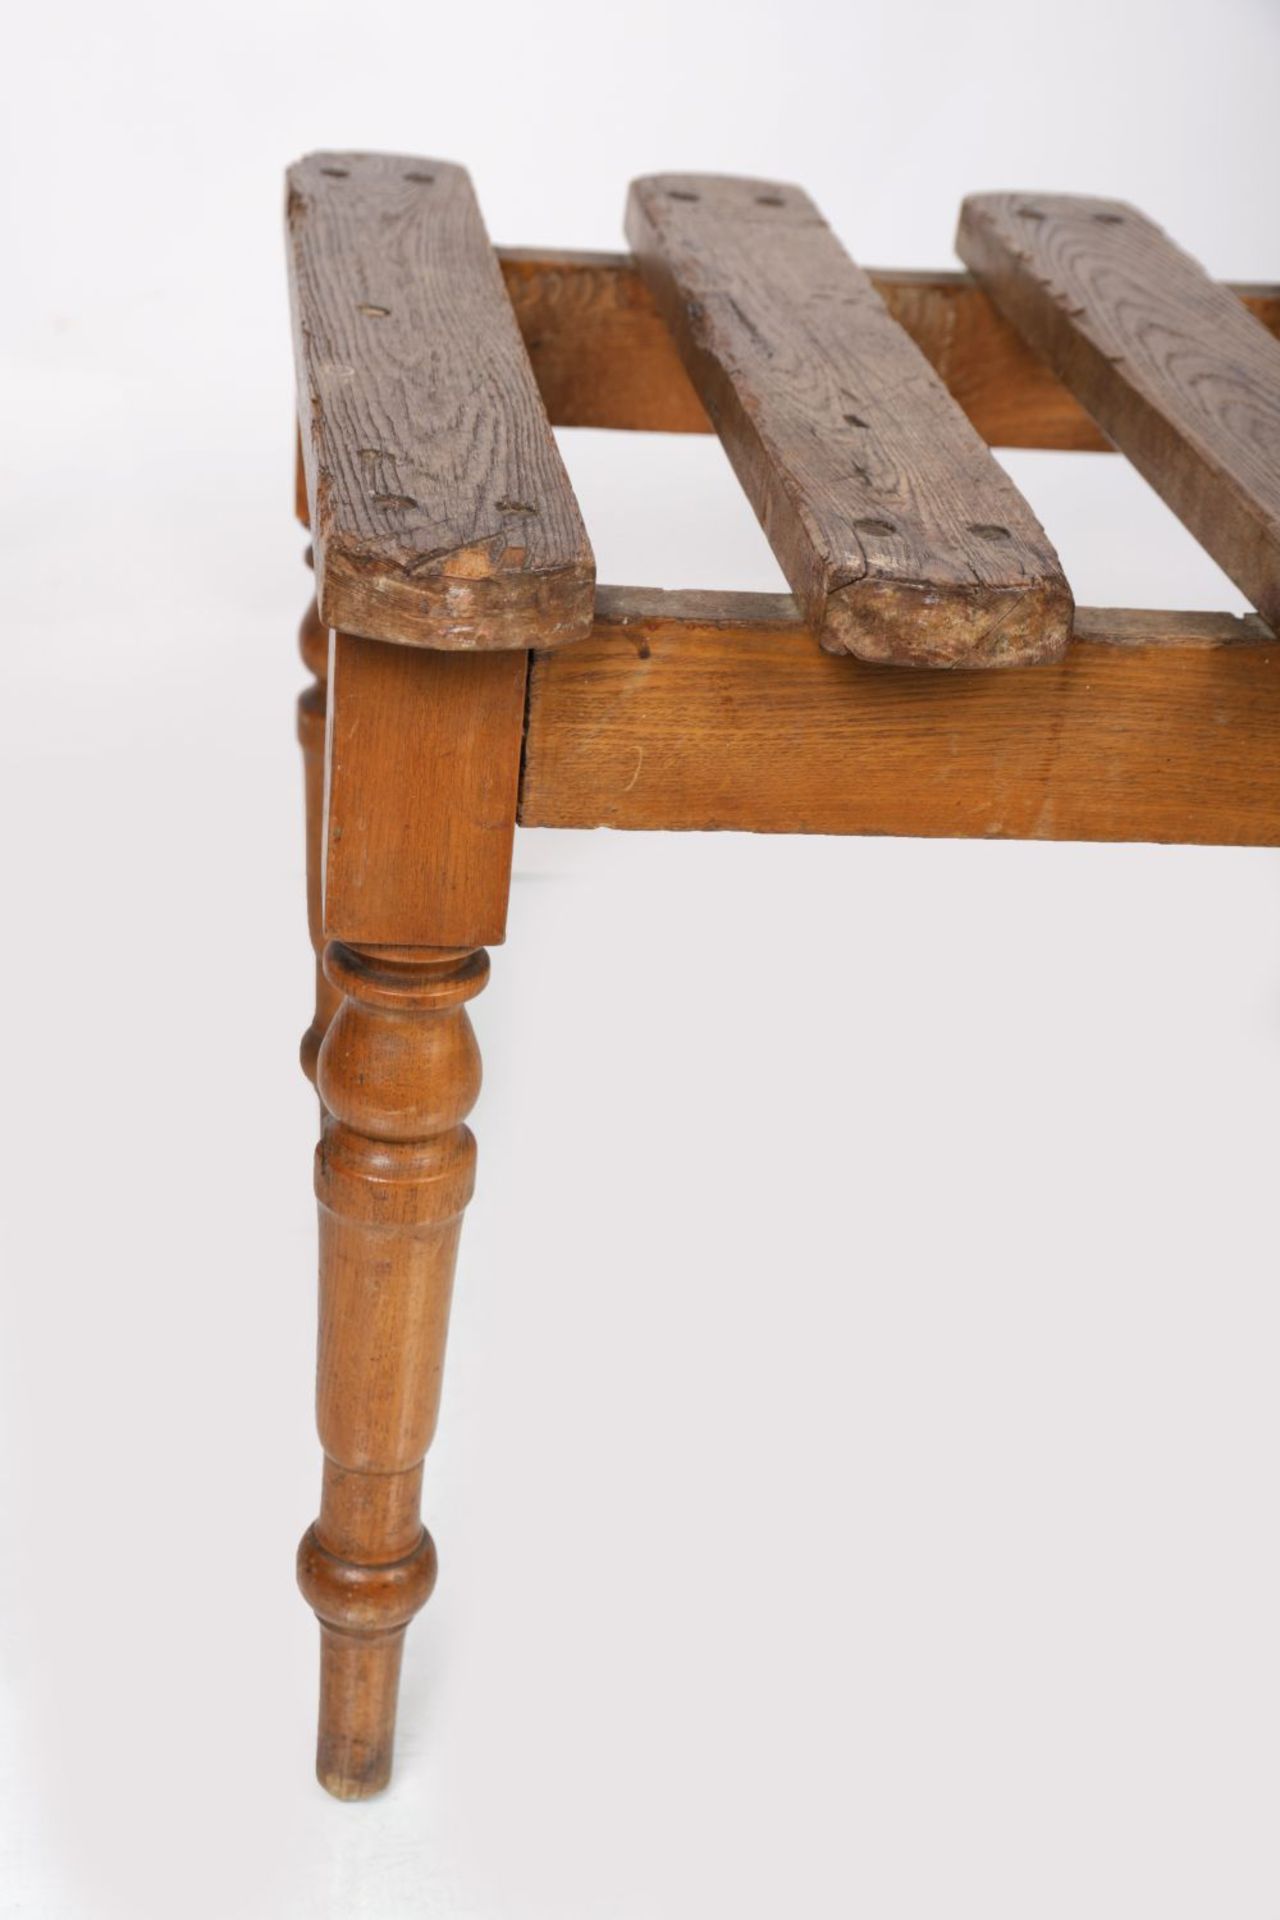 19TH-CENTURY OAK LUGGAGE STAND - Image 3 of 4